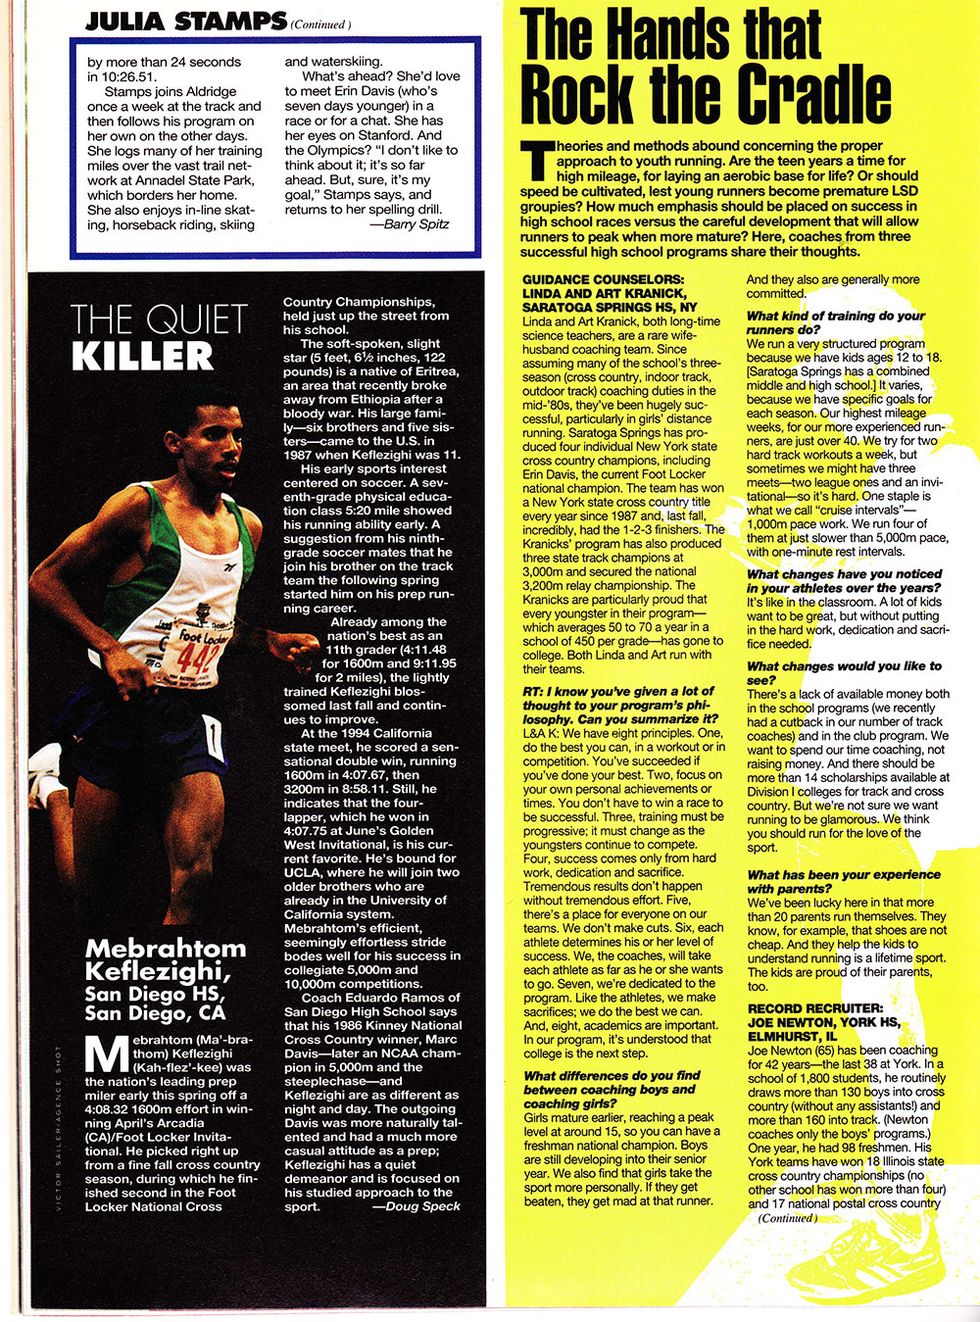 AND A LITTLE CHILD LED THEM - Sports Illustrated Vault